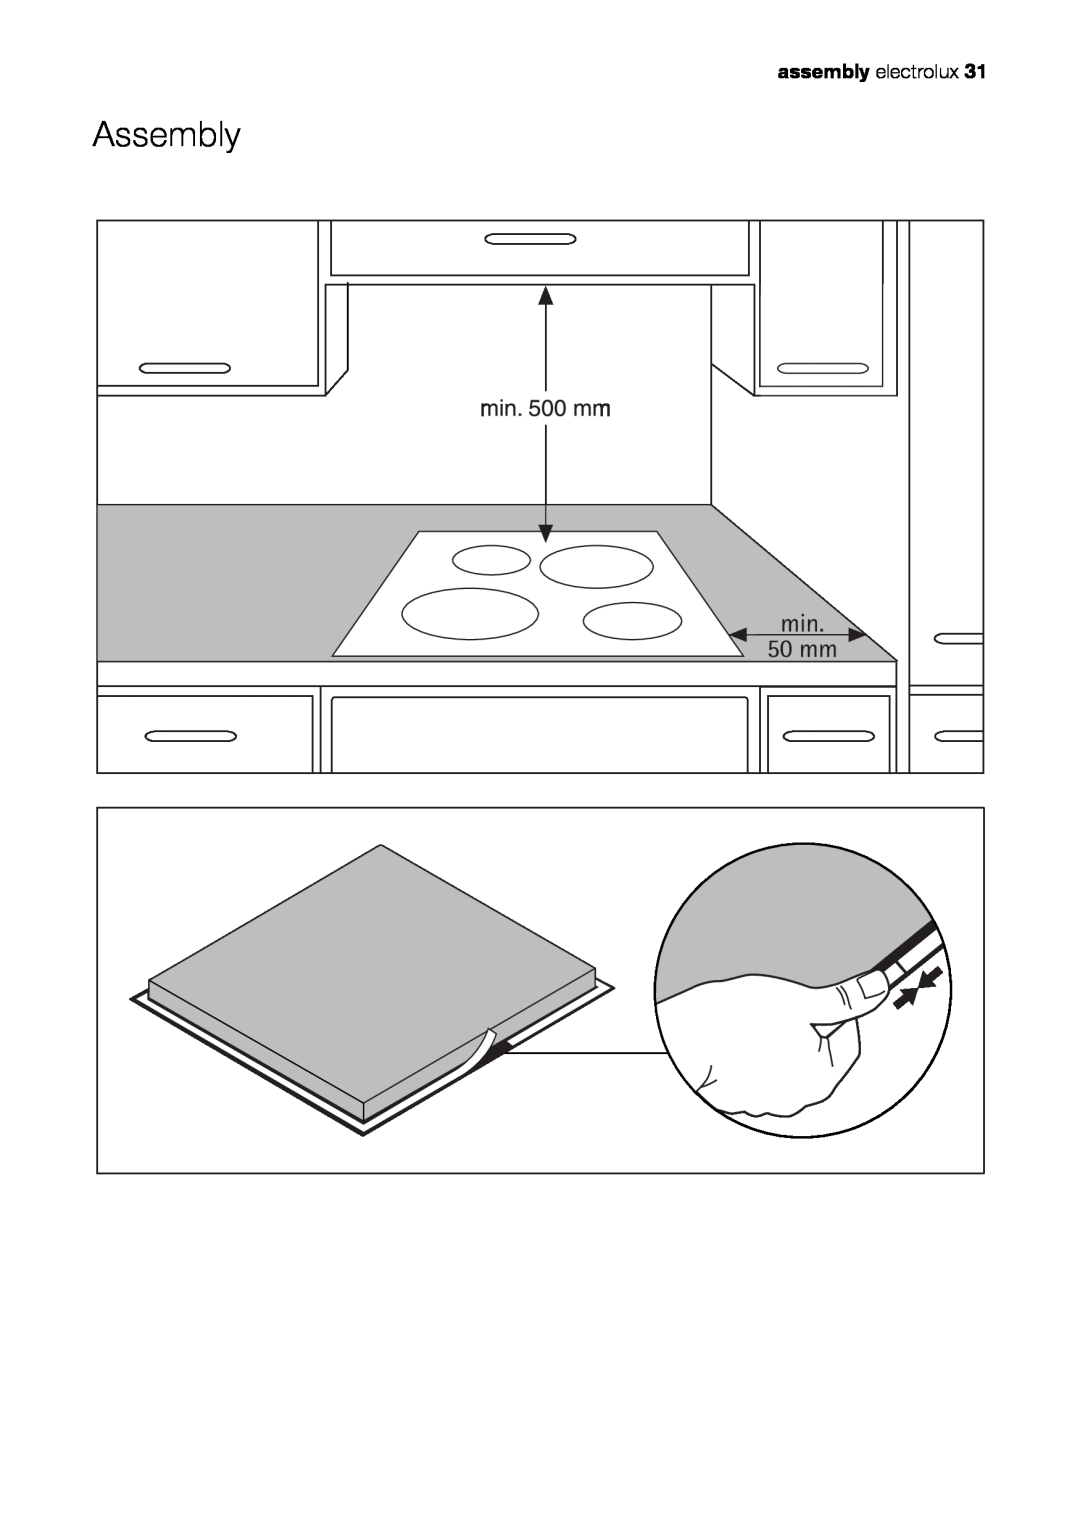 Electrolux EHS601210P user manual Assembly, assembly electrolux 